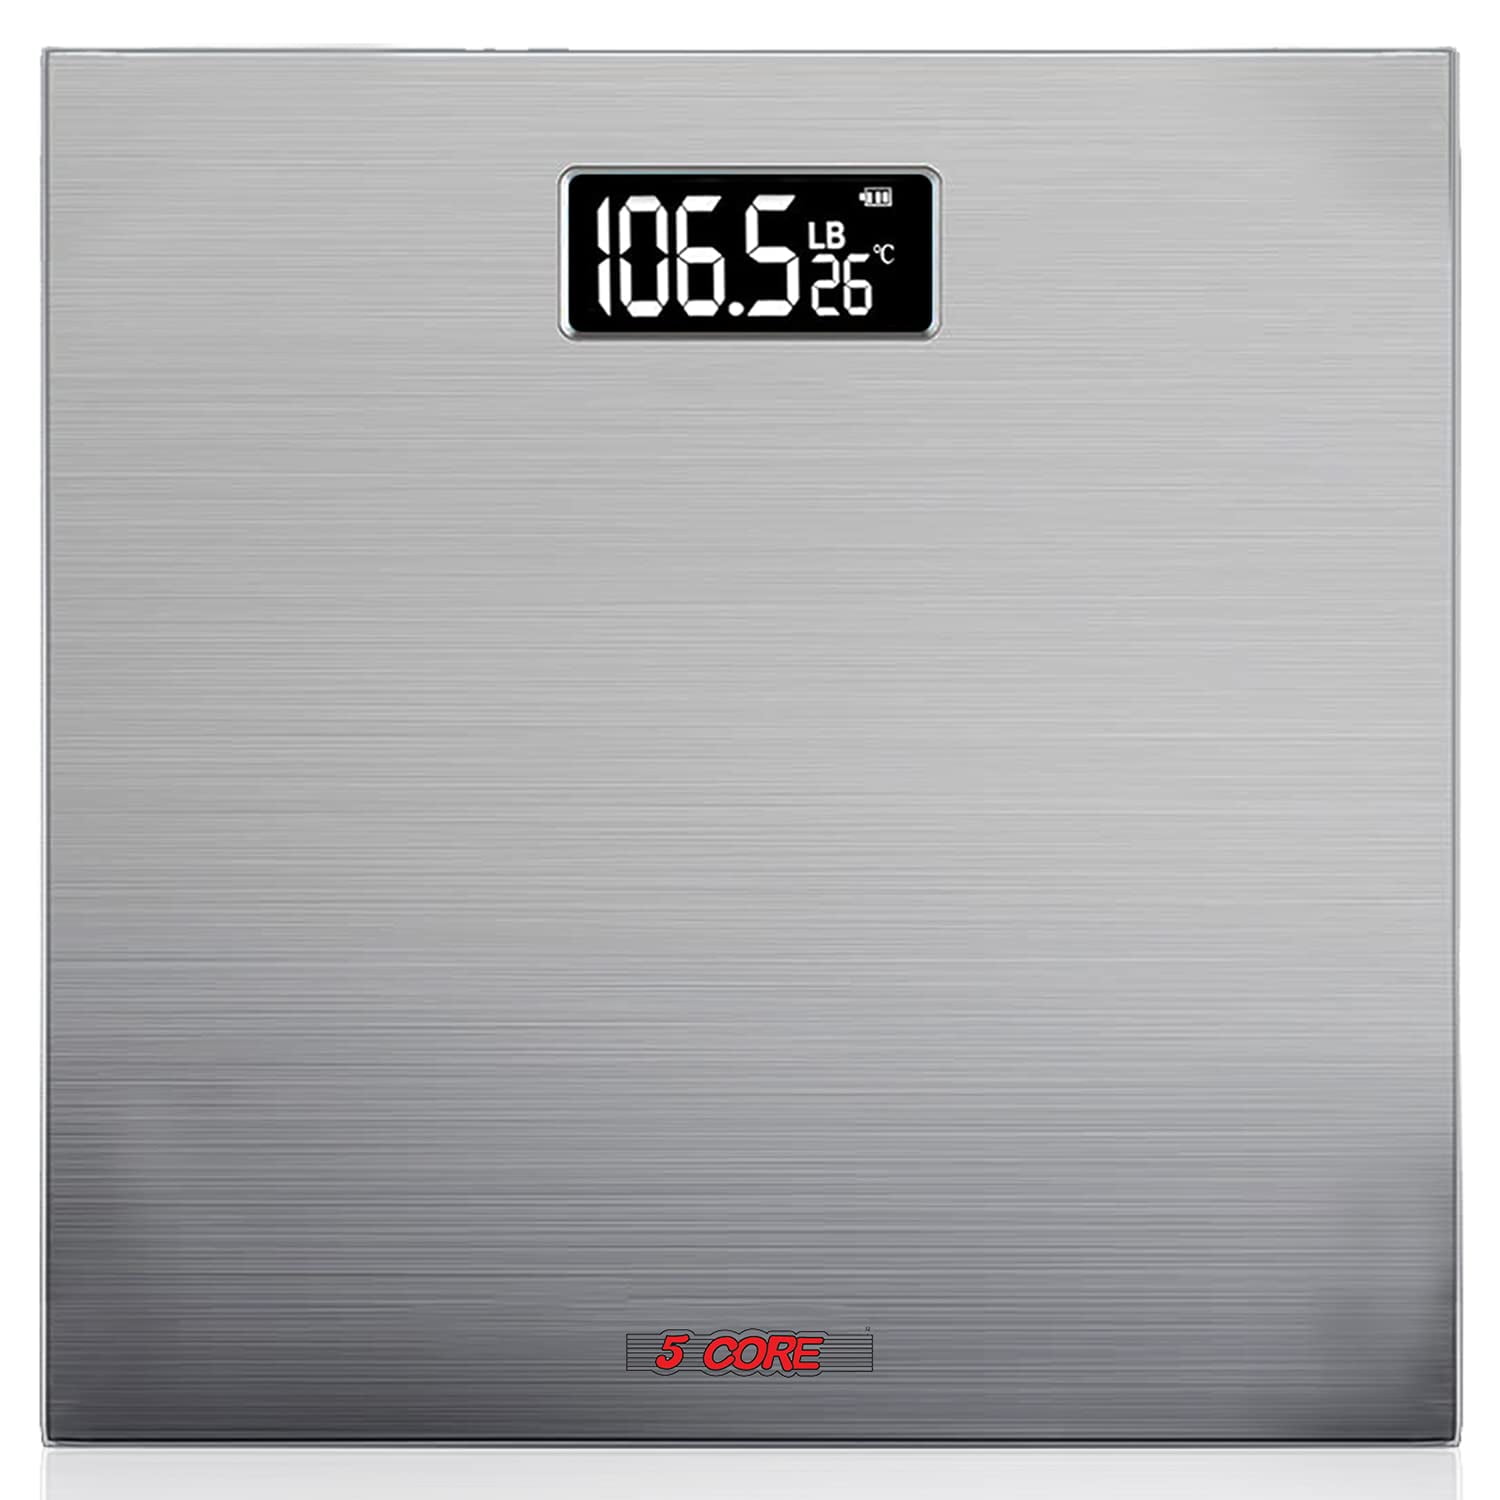 anyloop Smart Scale for Body Weight and Fat Percentage, Accurate Weight  Scale Bathroom Scale Large LED Display Bluetooth 400lb - AliExpress